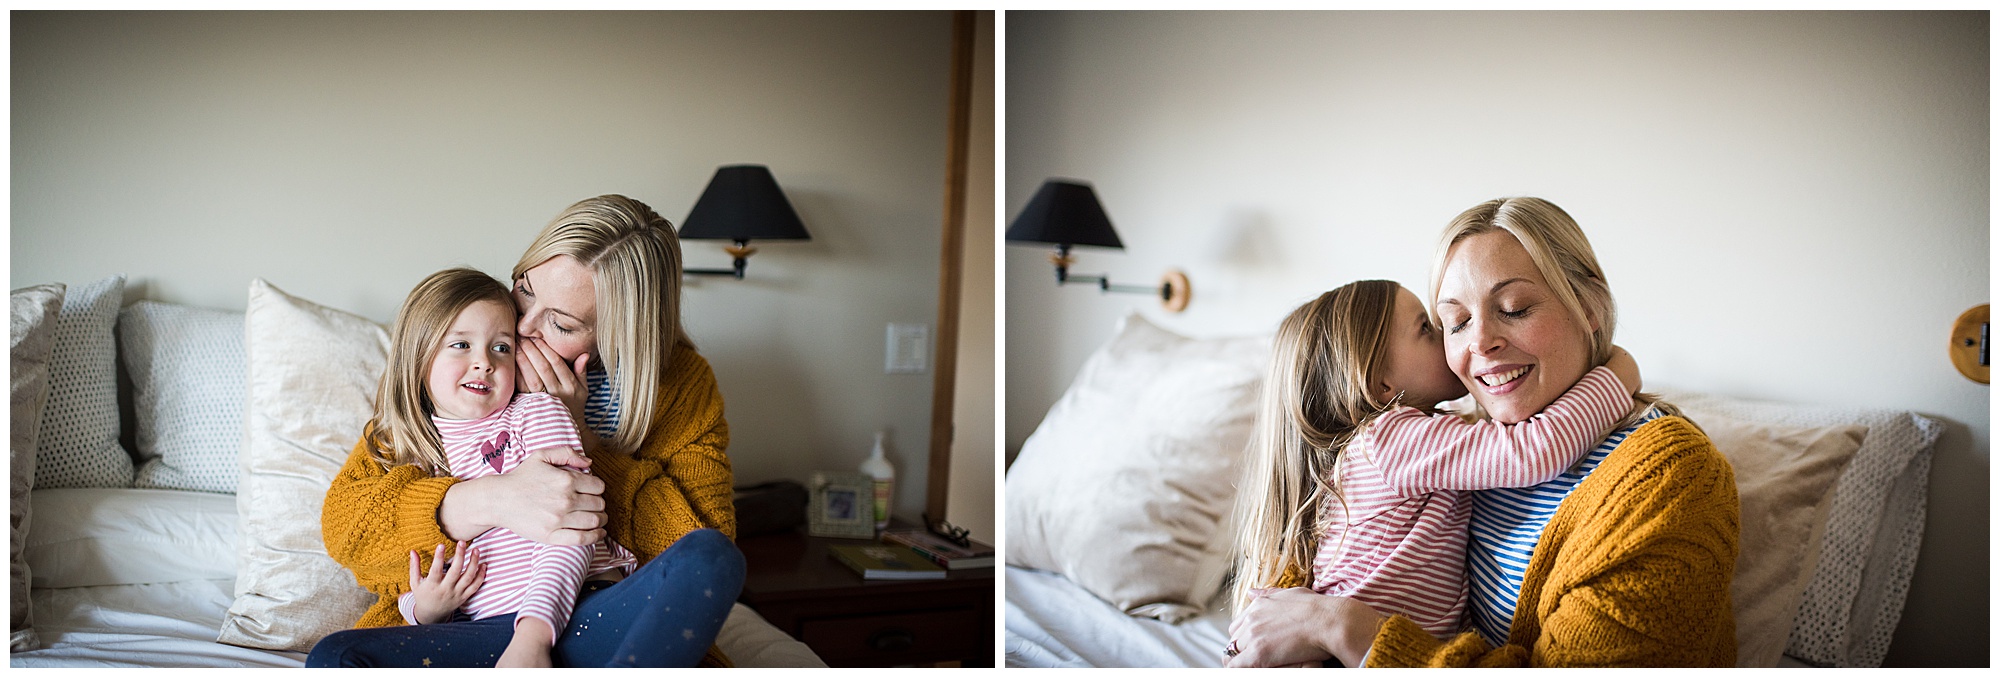 Mom and daughter on bed whispering secrets to each other Emily Ann Photography Seattle Kirkland Bellevue Photographer